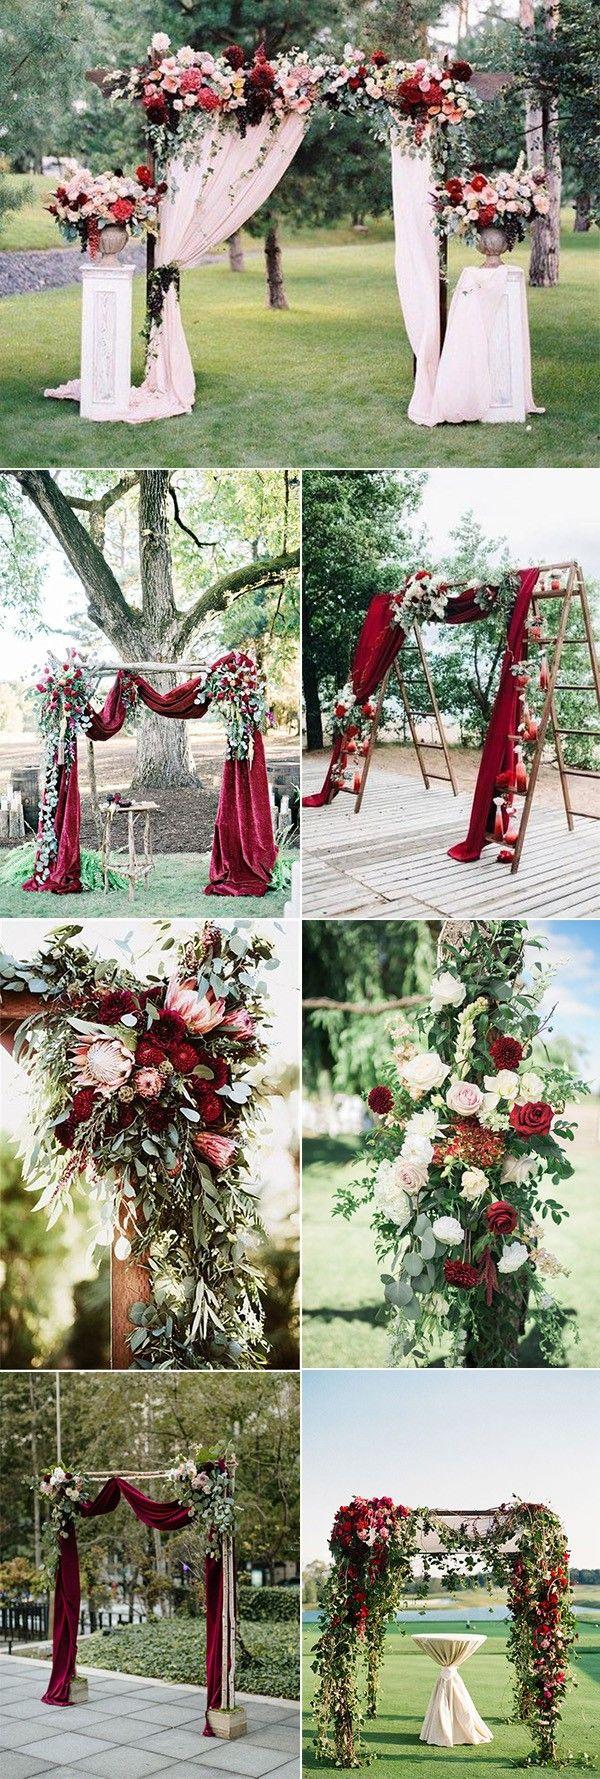 Mariage - 42 Brilliant Burgundy Wedding Ideas For Fall And Winter